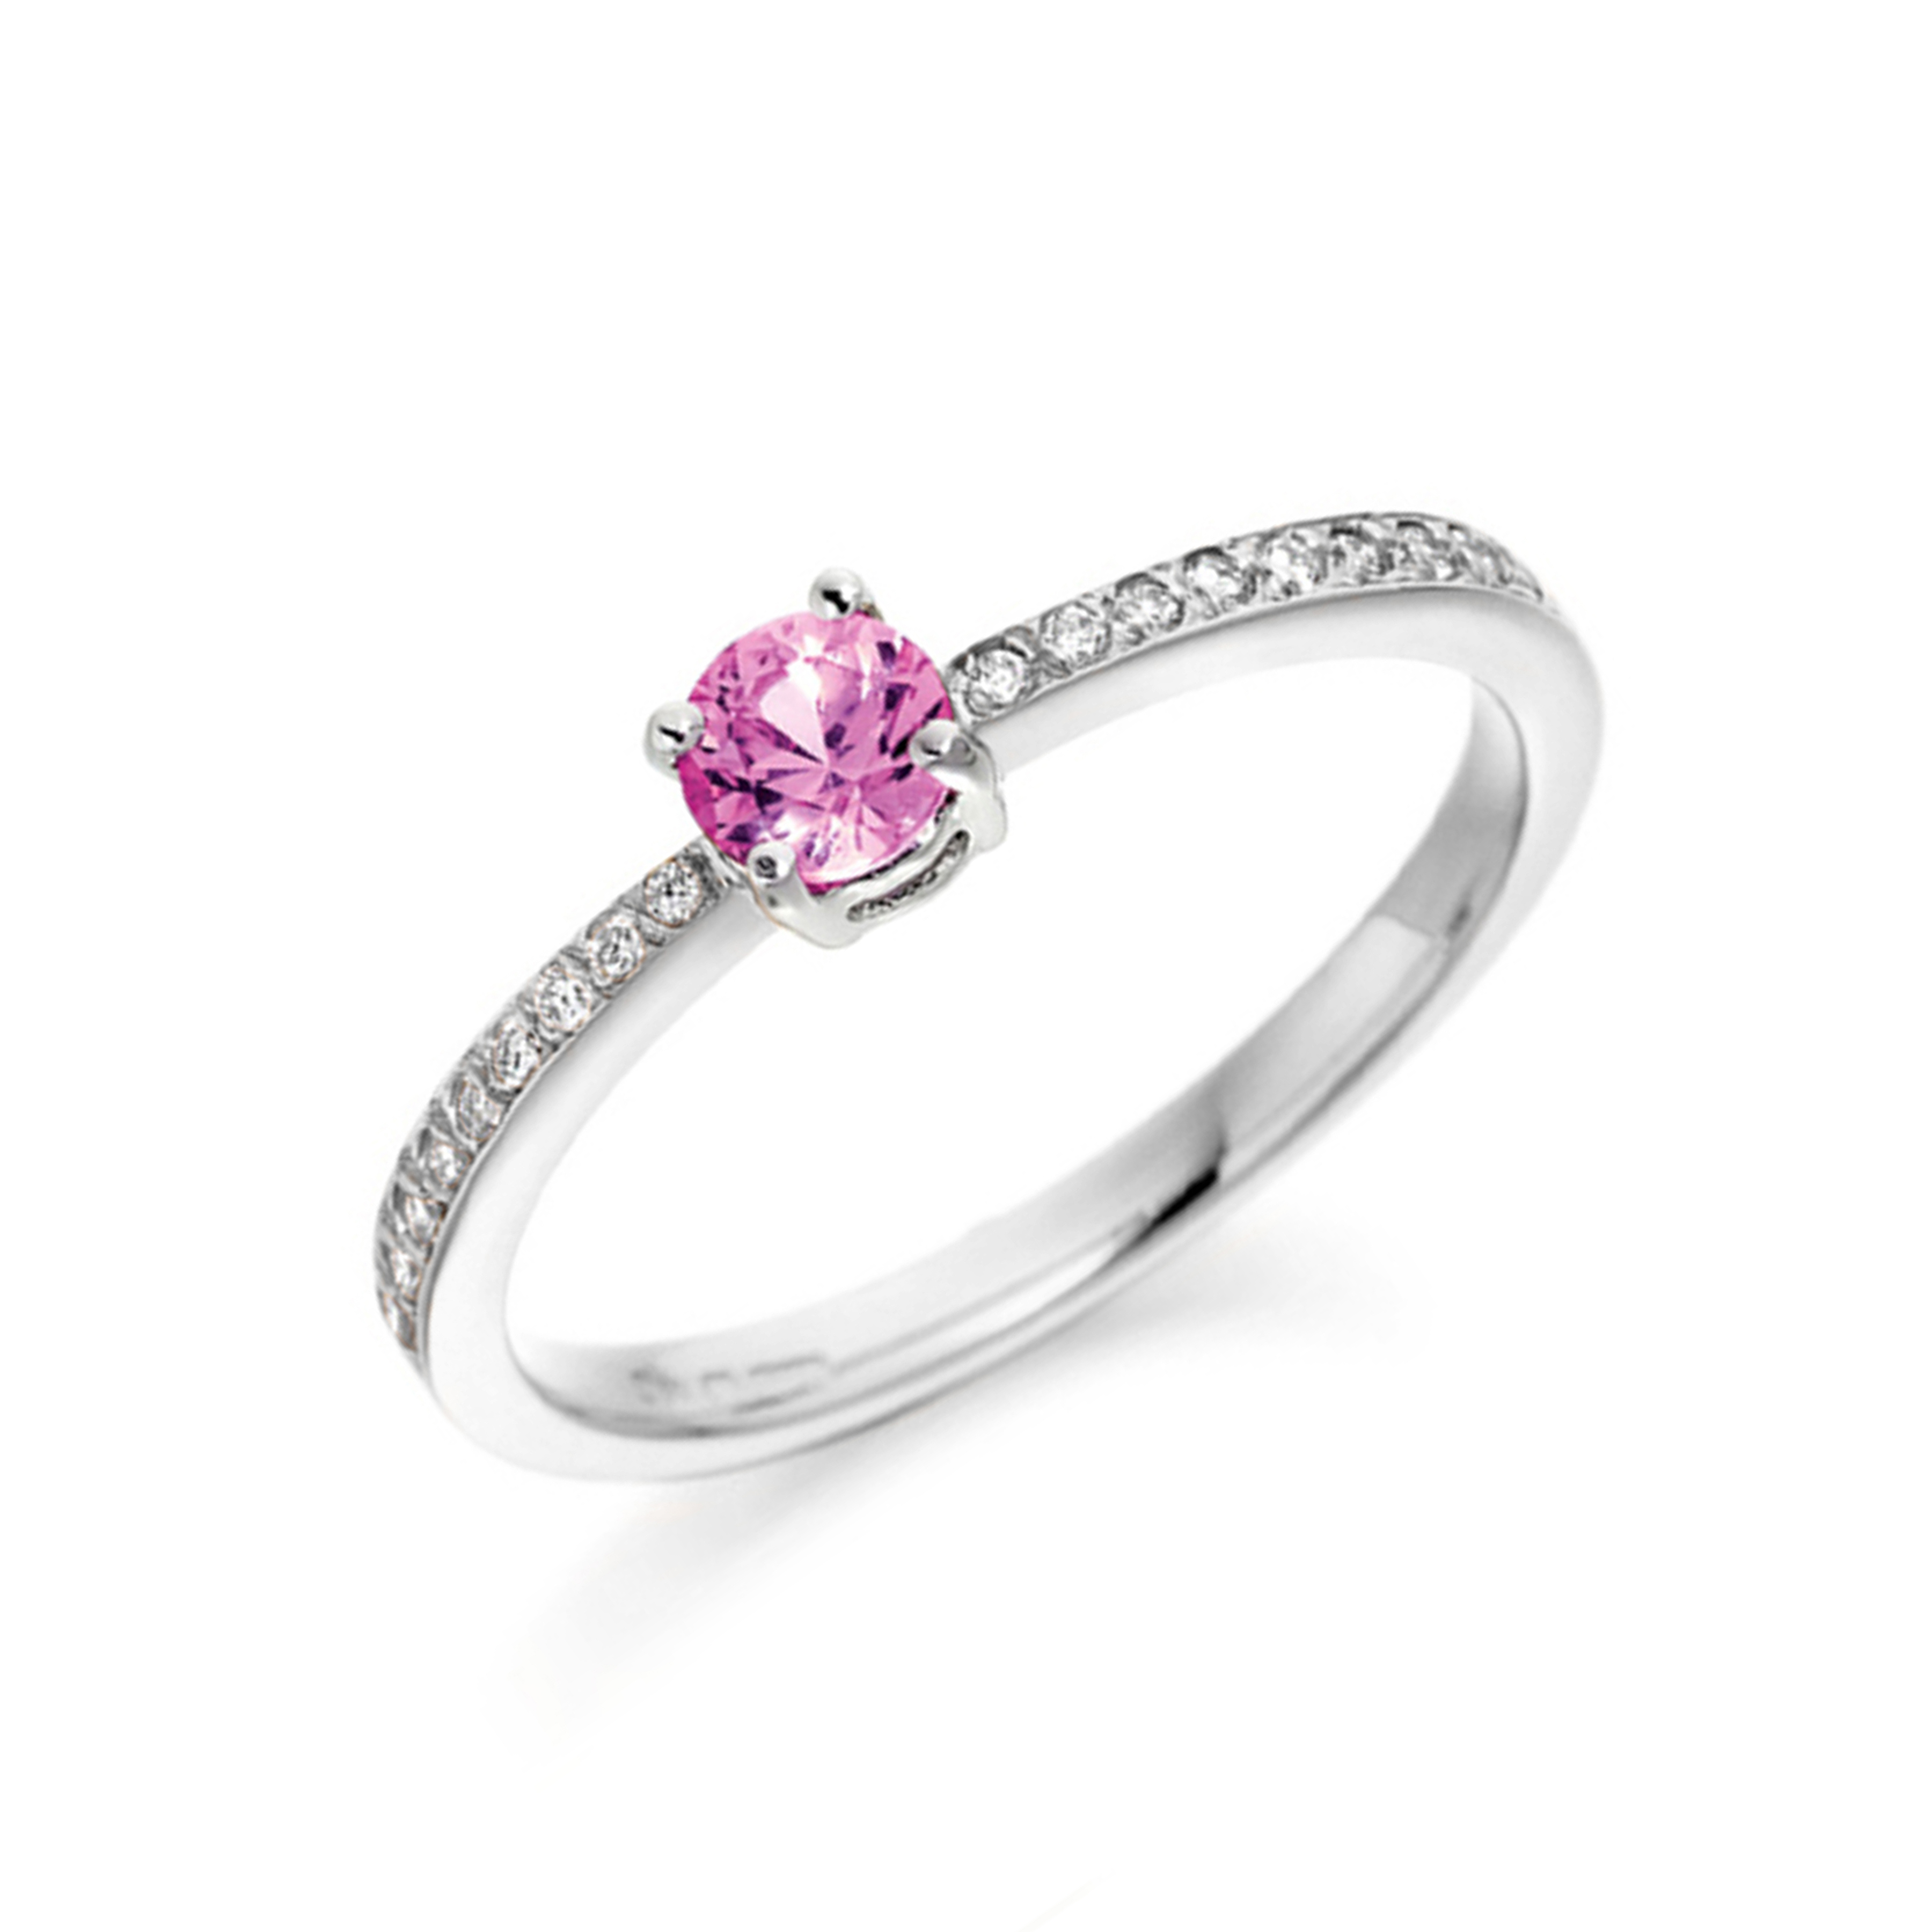 5X5mm Round Pink Sapphire Stones On Shoulder Diamond And Gemstone Engagement Ring